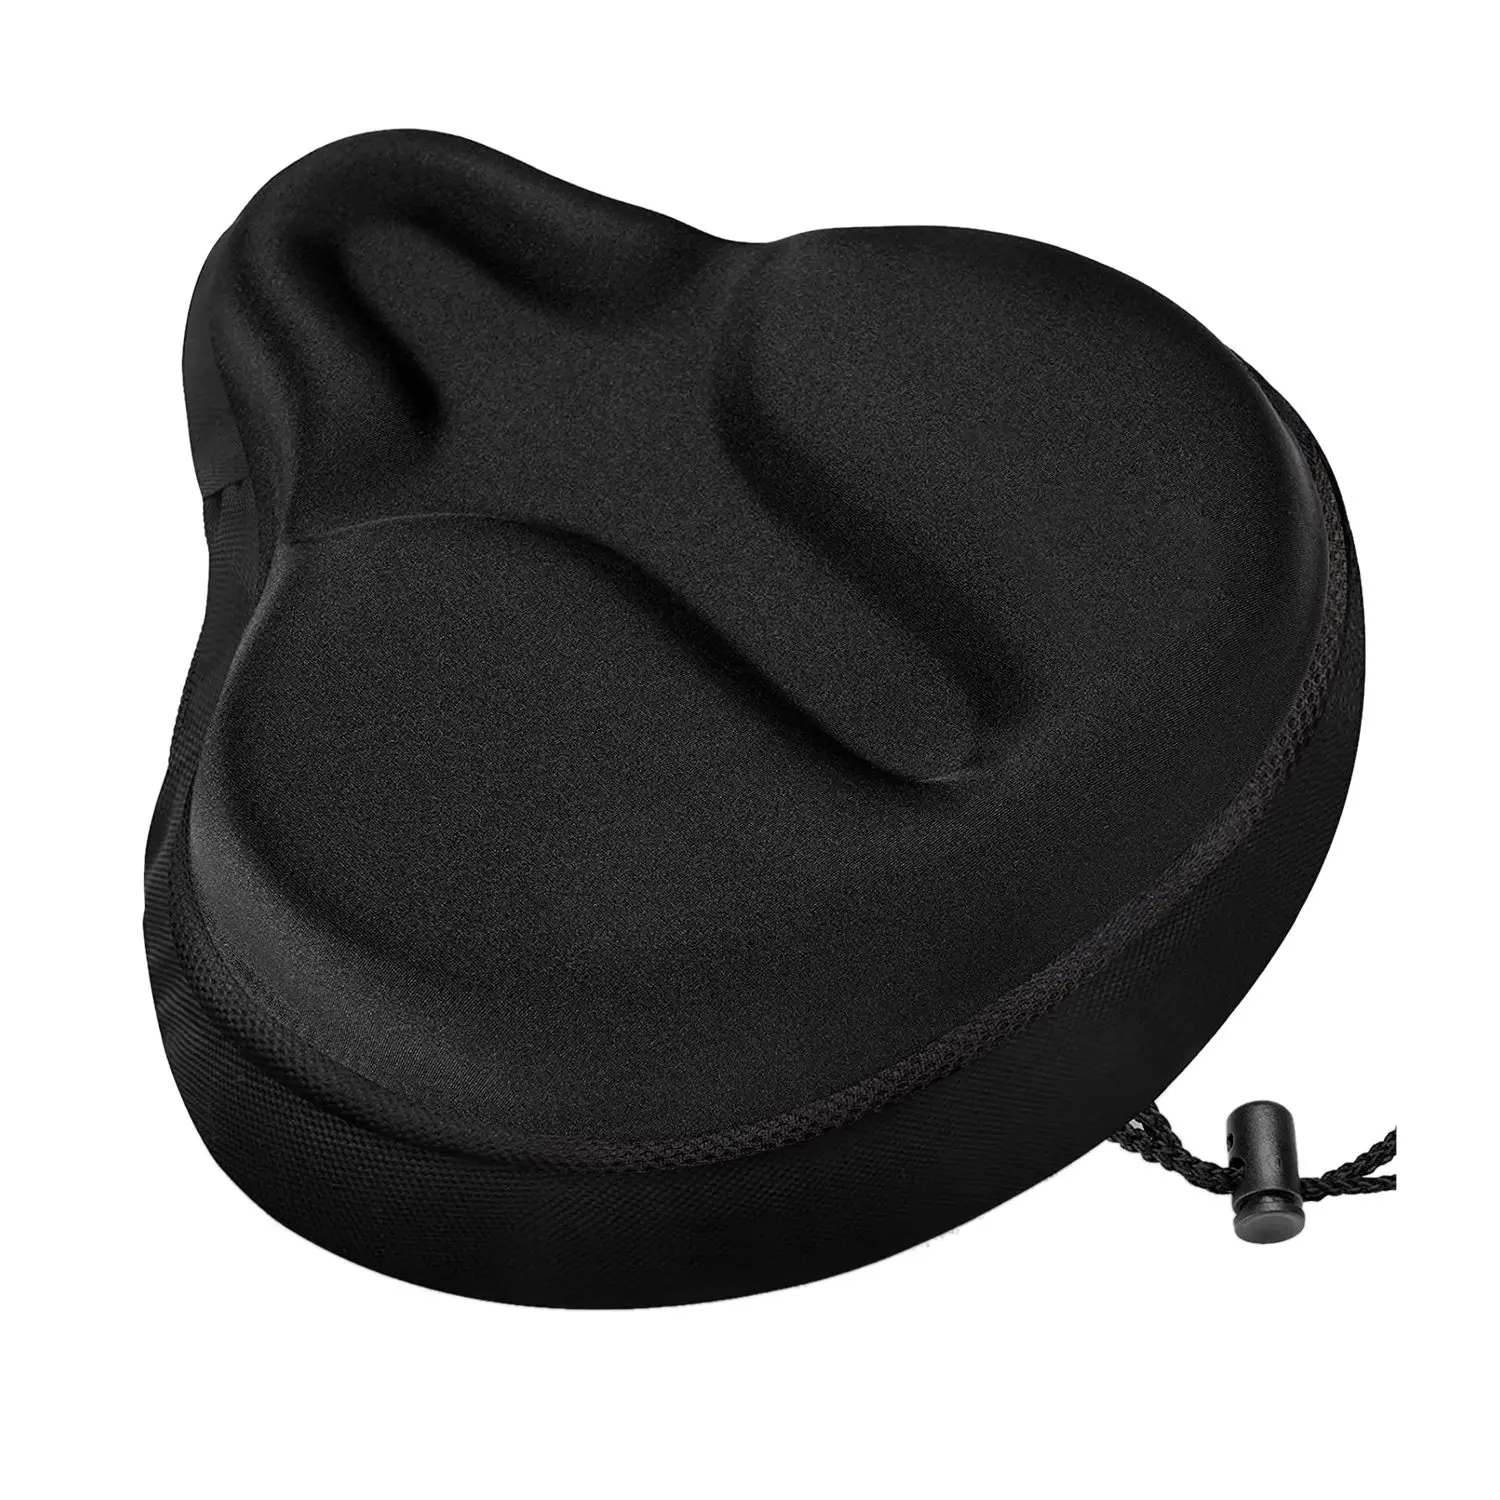 Bike Cushion - Bike Cover for Bicycle and Exercise Bike, for